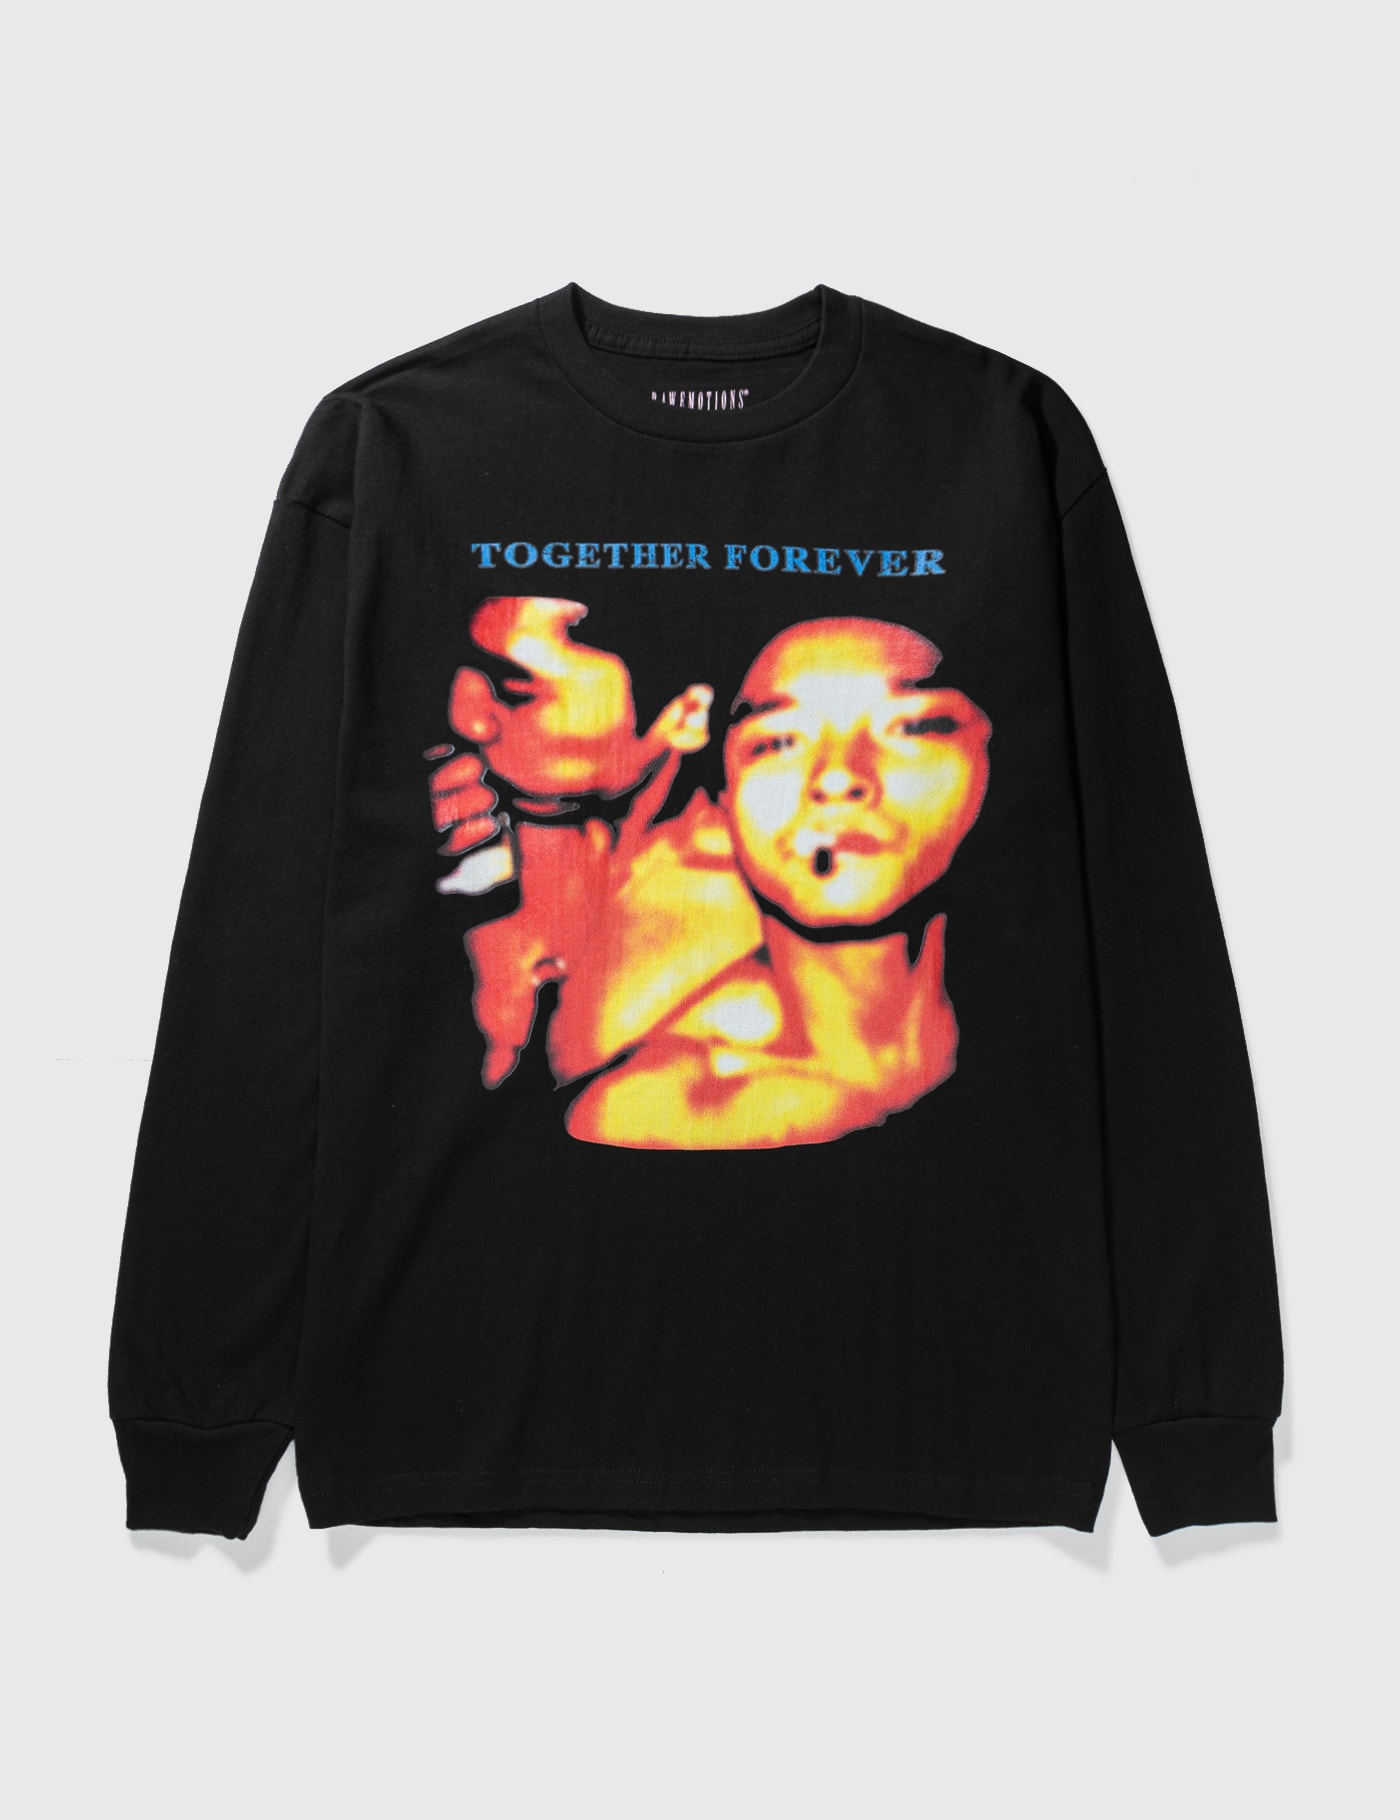 Raw Emotions Together Forever Long Sleeve T-shirt In Black